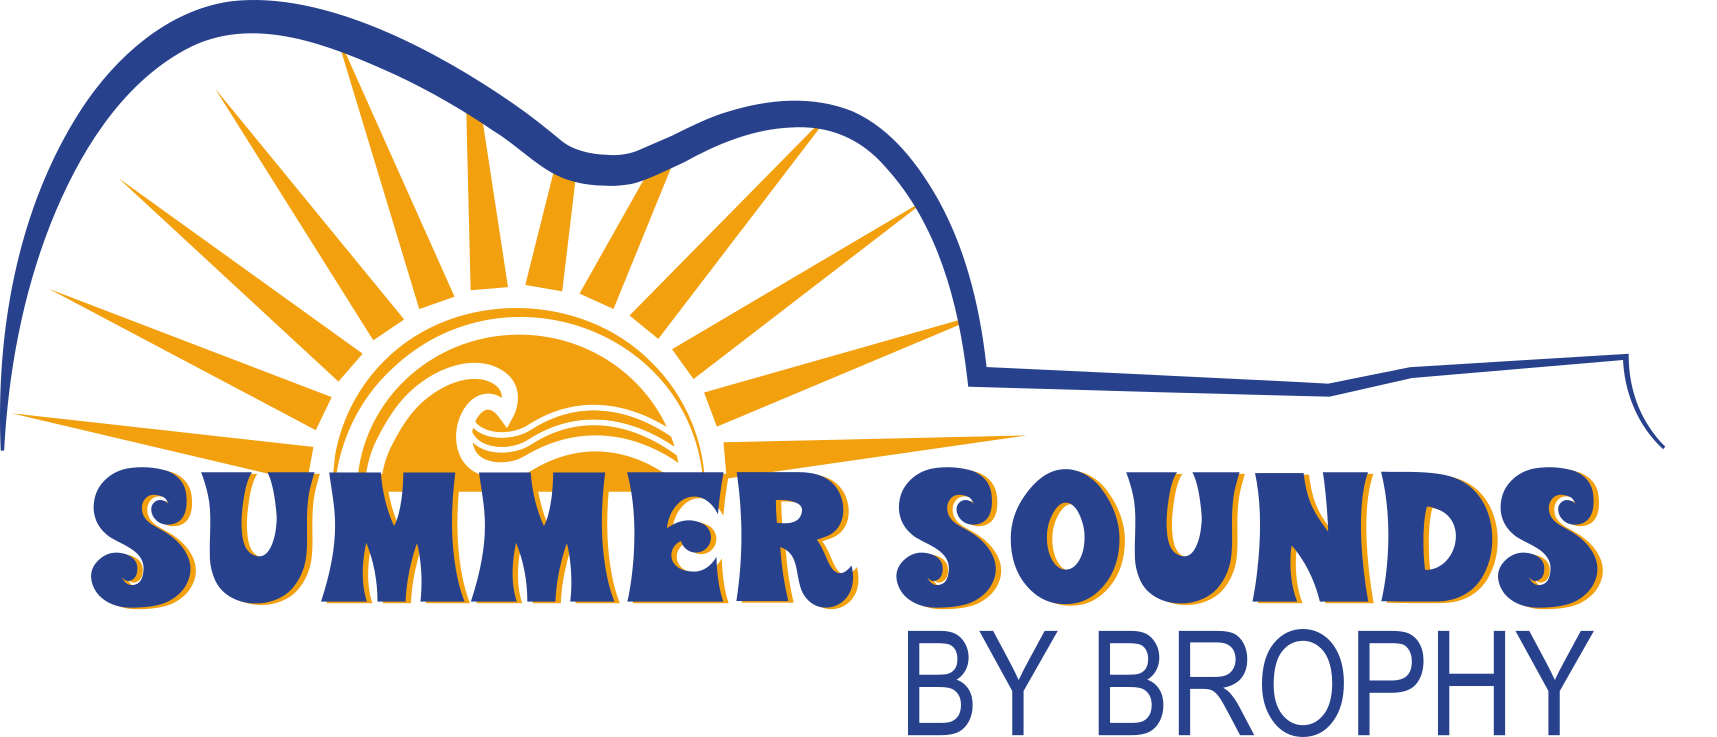 Logo - Summer Sounds by Bropy concert series